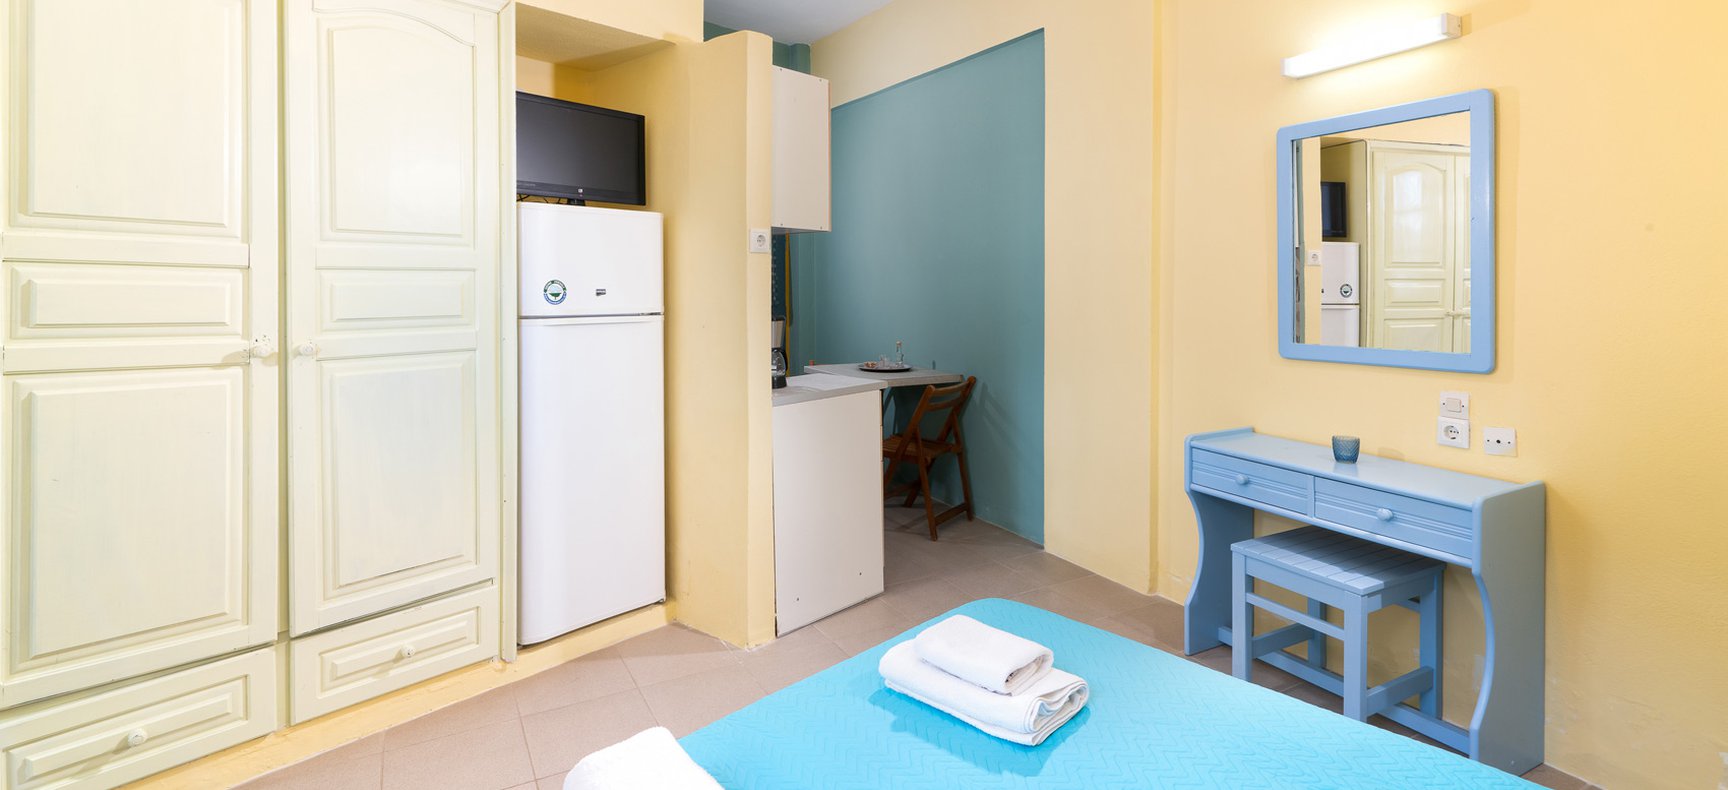 Afroditi Apartments, Apartment Photo with equipped kitchen